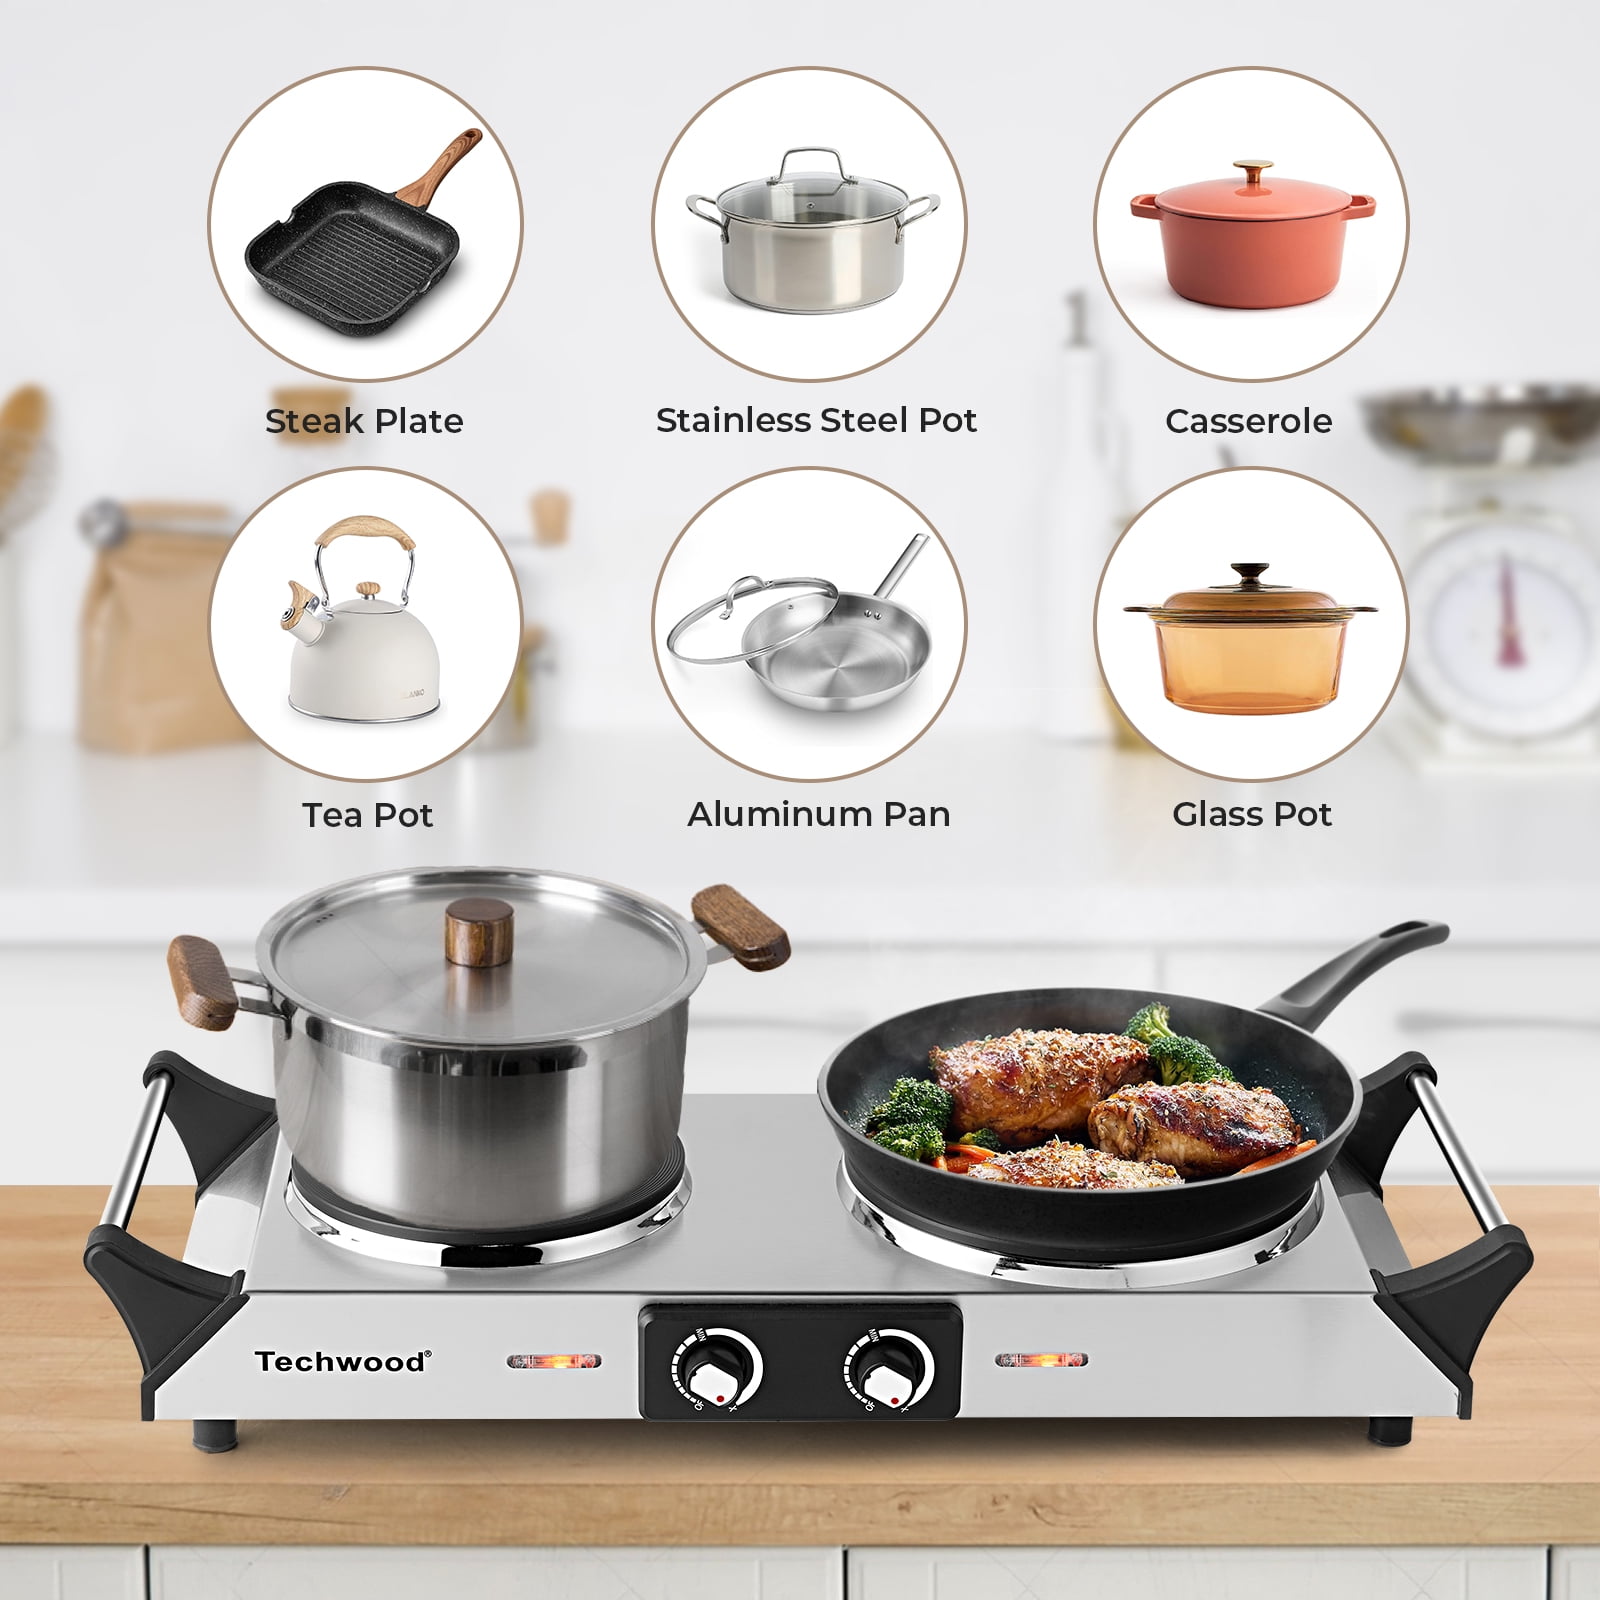 Techwood Electric Stove, Double Infrared Ceramic Hot Plate for Cooking, Two  Control Cooktop Burner, Portable Anti-scald handles Suitable for